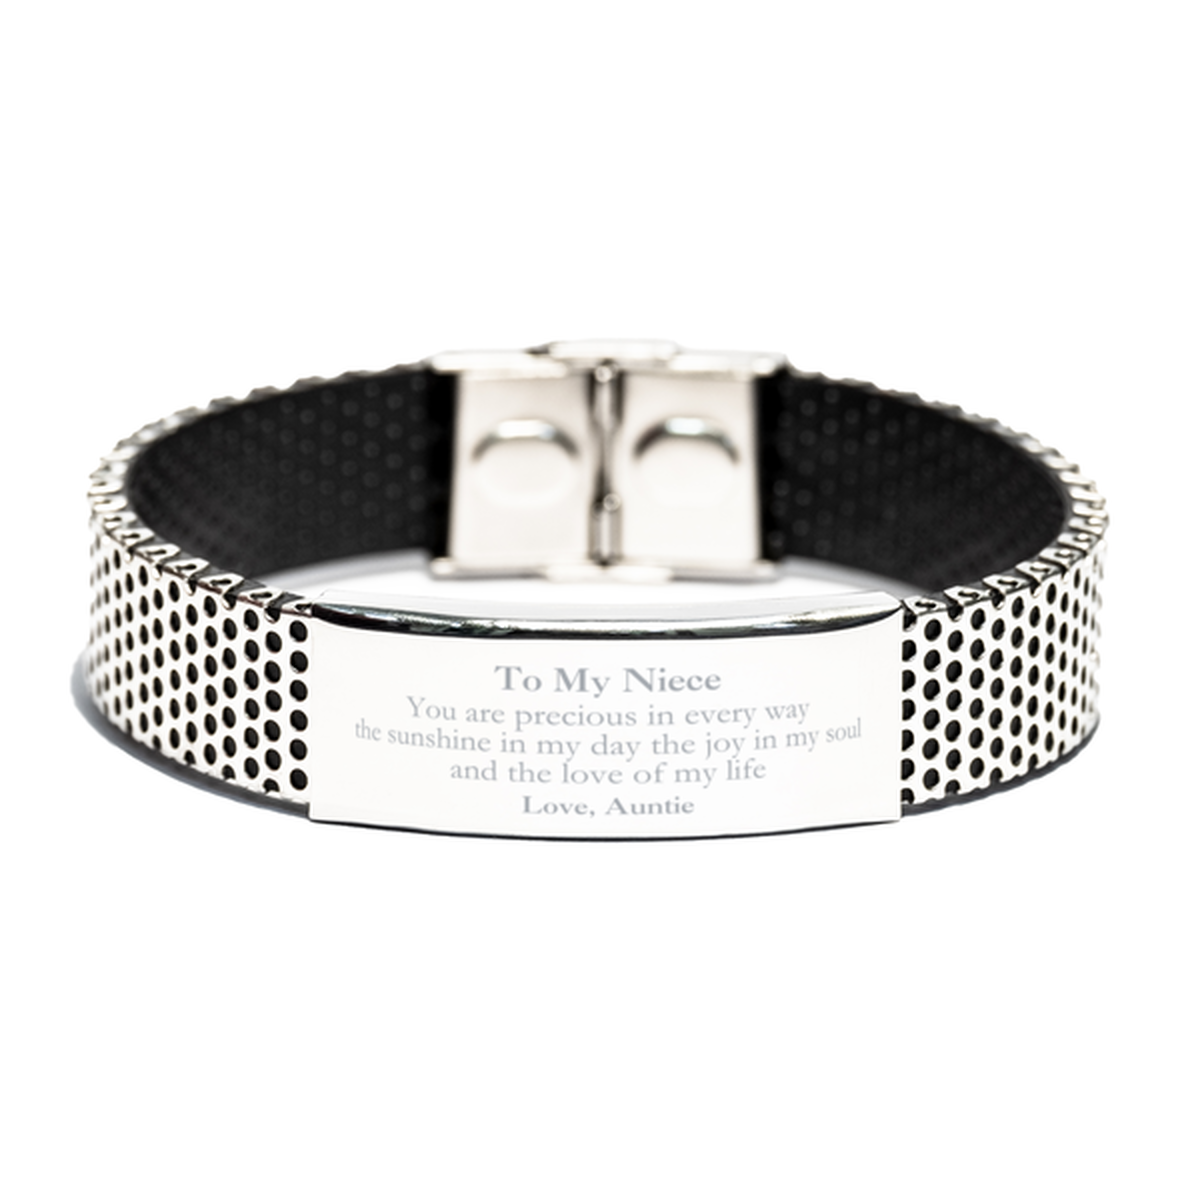 Graduation Gifts for Niece Stainless Steel Bracelet Present from Auntie, Christmas Niece Birthday Gifts Niece You are precious in every way the sunshine in my day. Love, Auntie